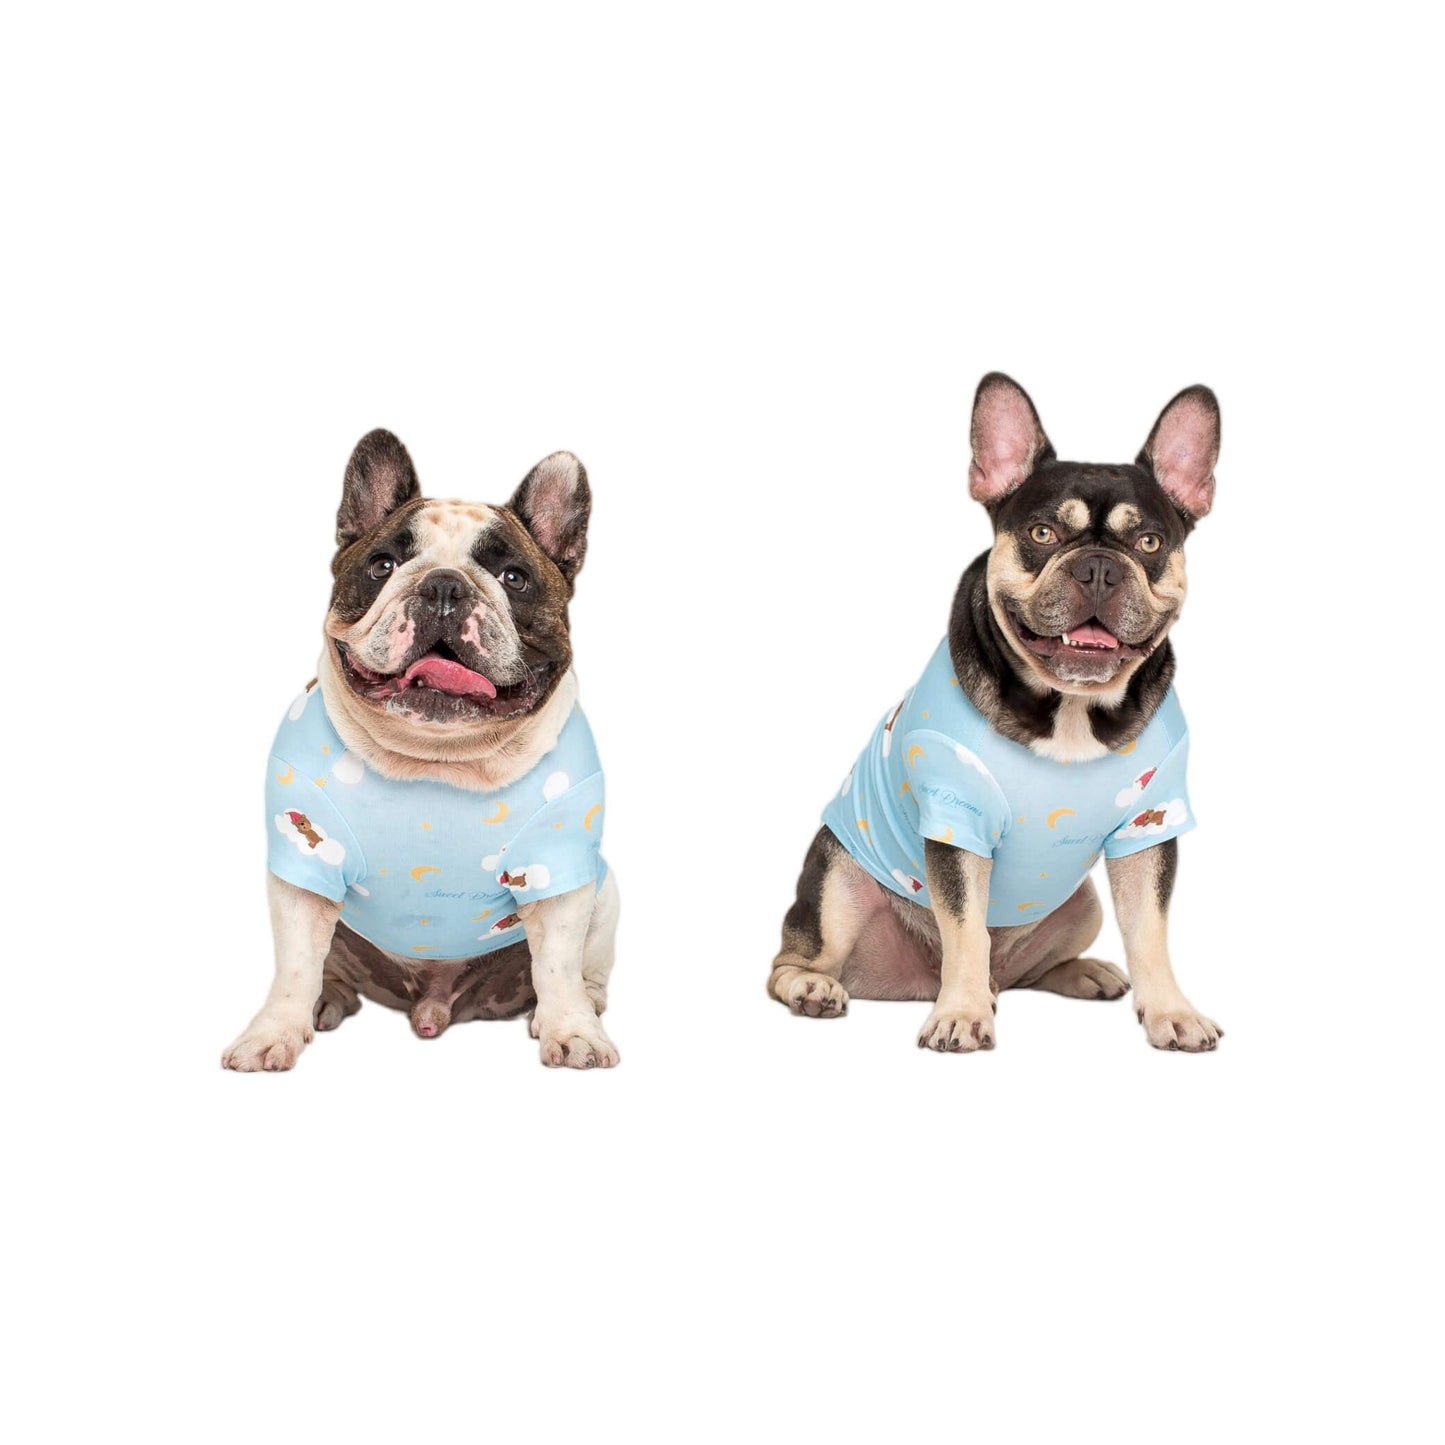 One brindle French Bulldog and one chocolate and tan French Bulldog wearing Vibrant Hound Lil Dreamer pyjamas for dogs.